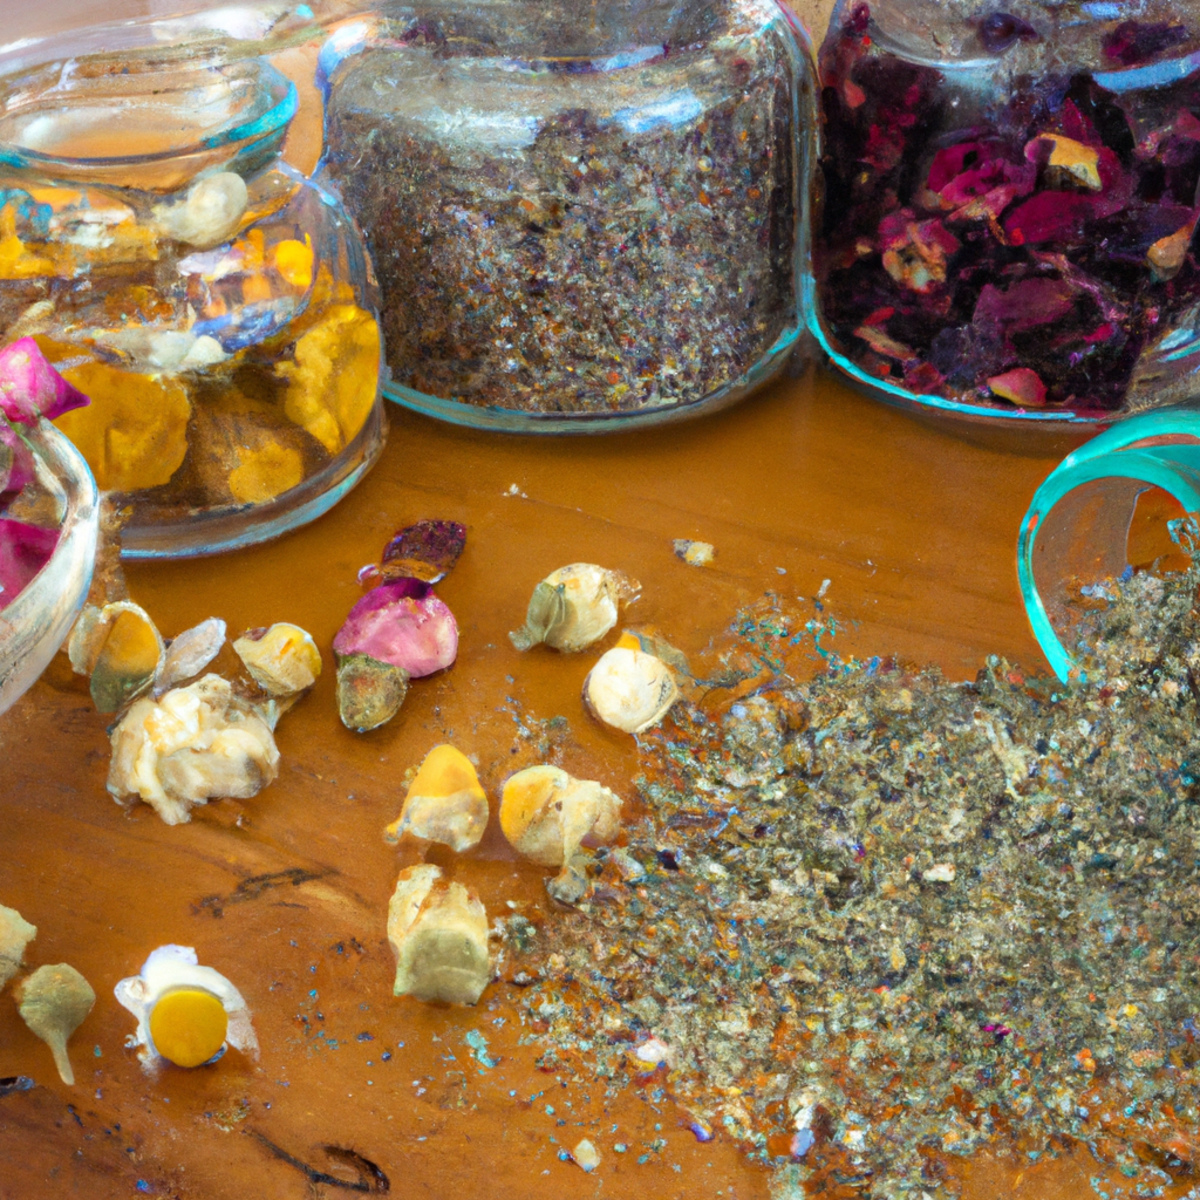 Herbal remedies for stress on a wooden table, with lavender, chamomile, rose petals, and essential oil. Person in background relaxed.